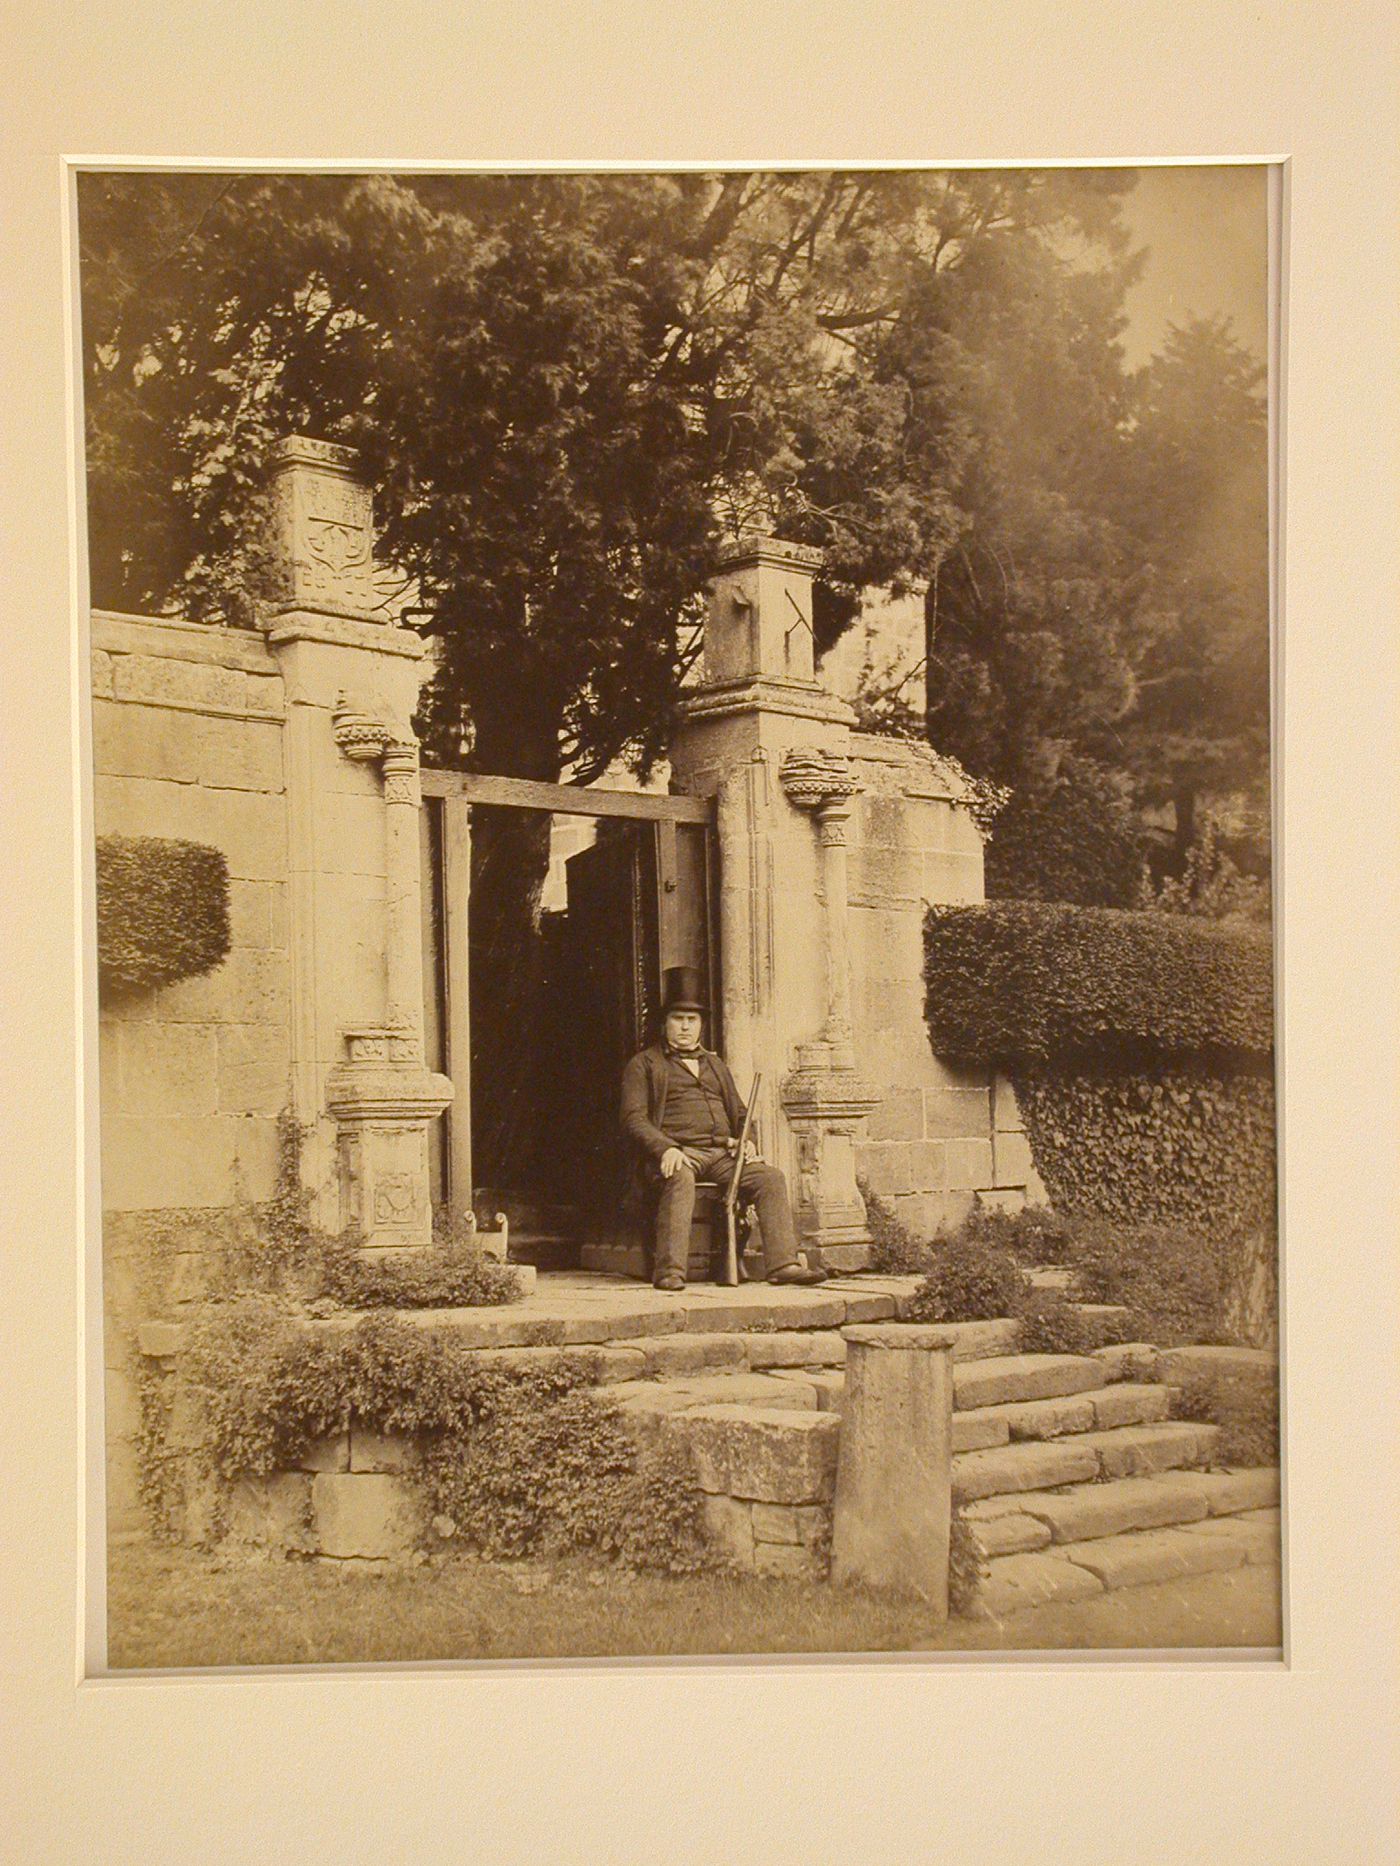 View of ruined portal, man with gun seated before, Yorkshire, England